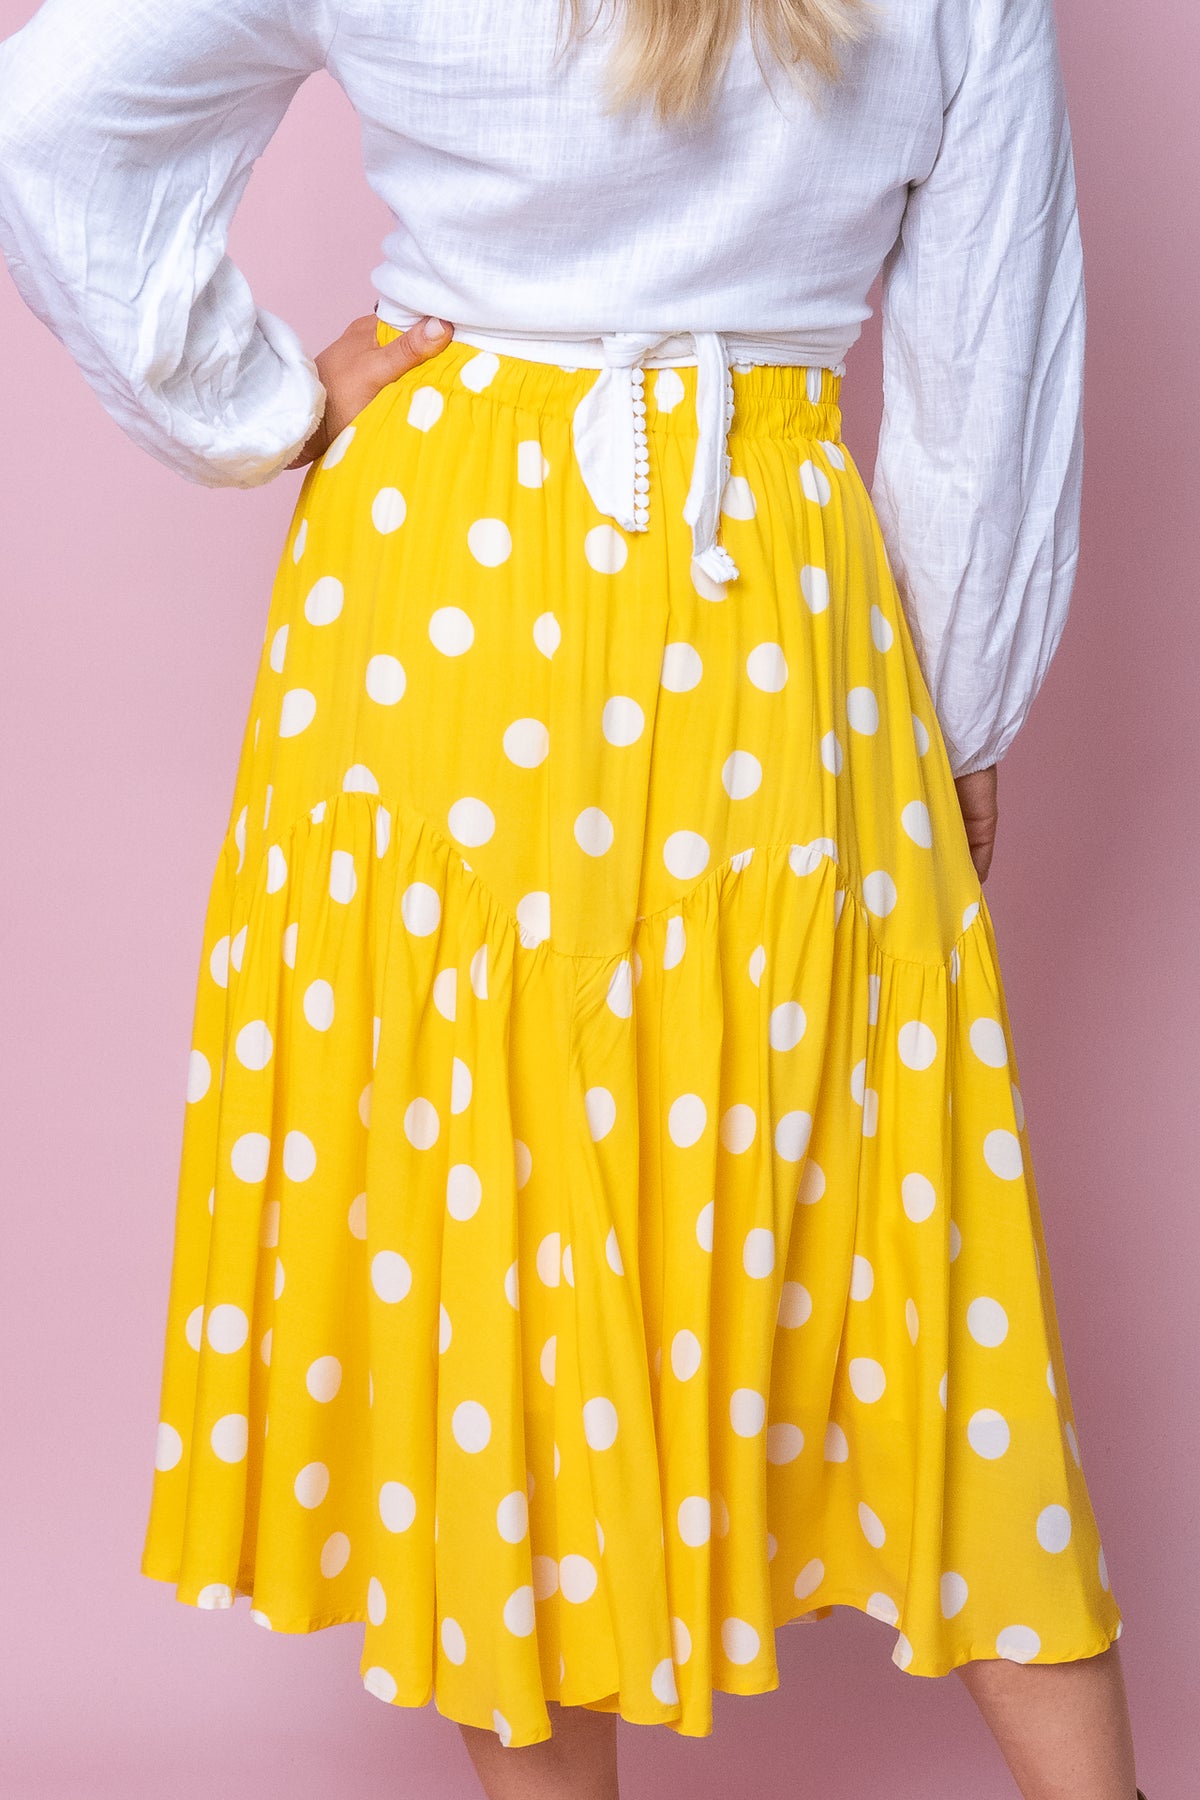 Jezabel Skirt in Canary Yellow